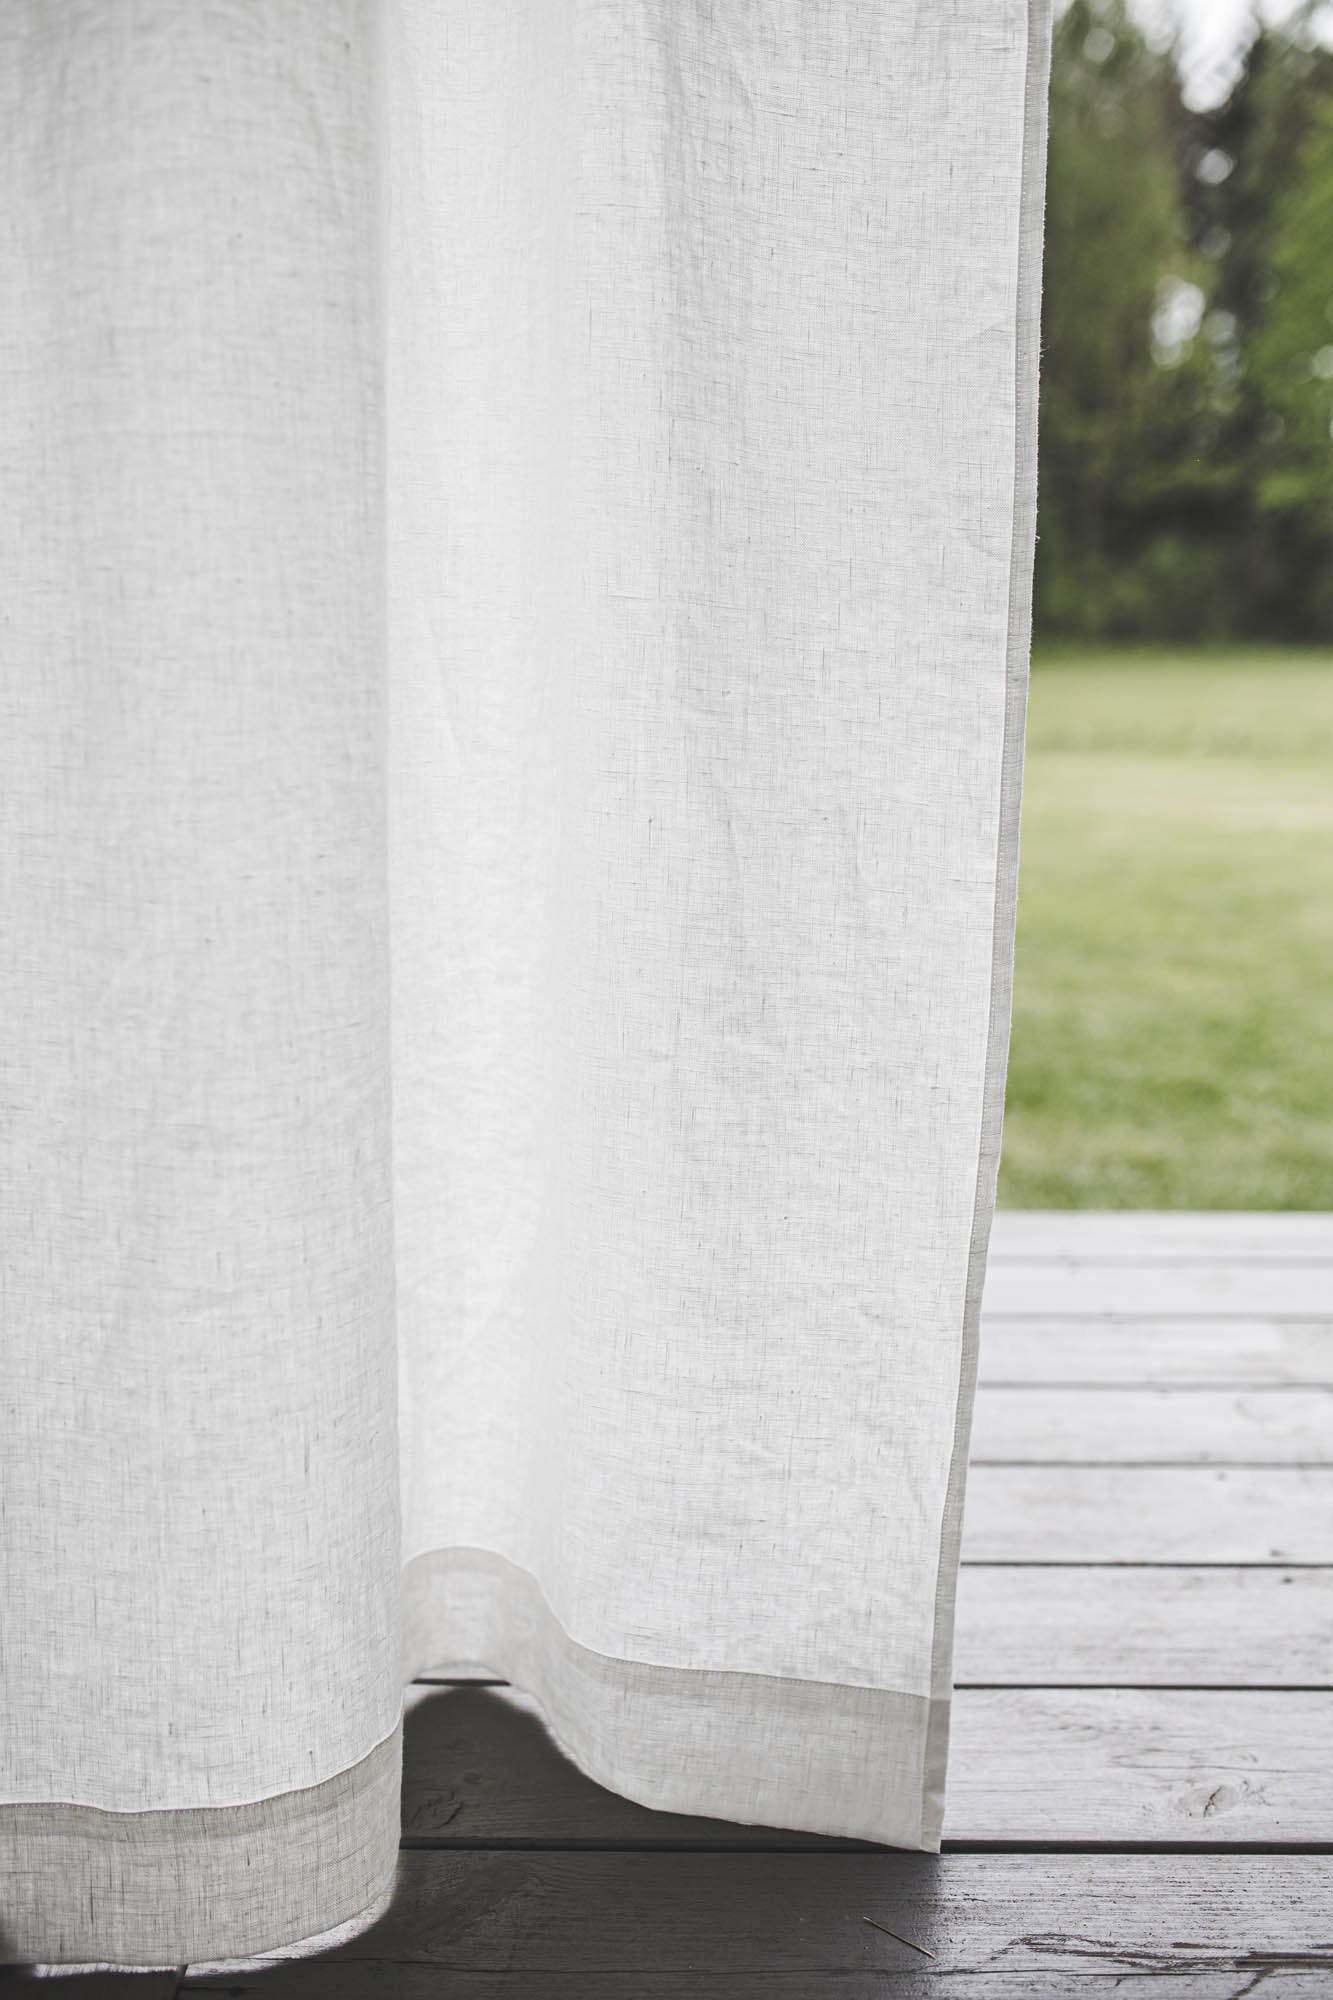 Off white linen curtain